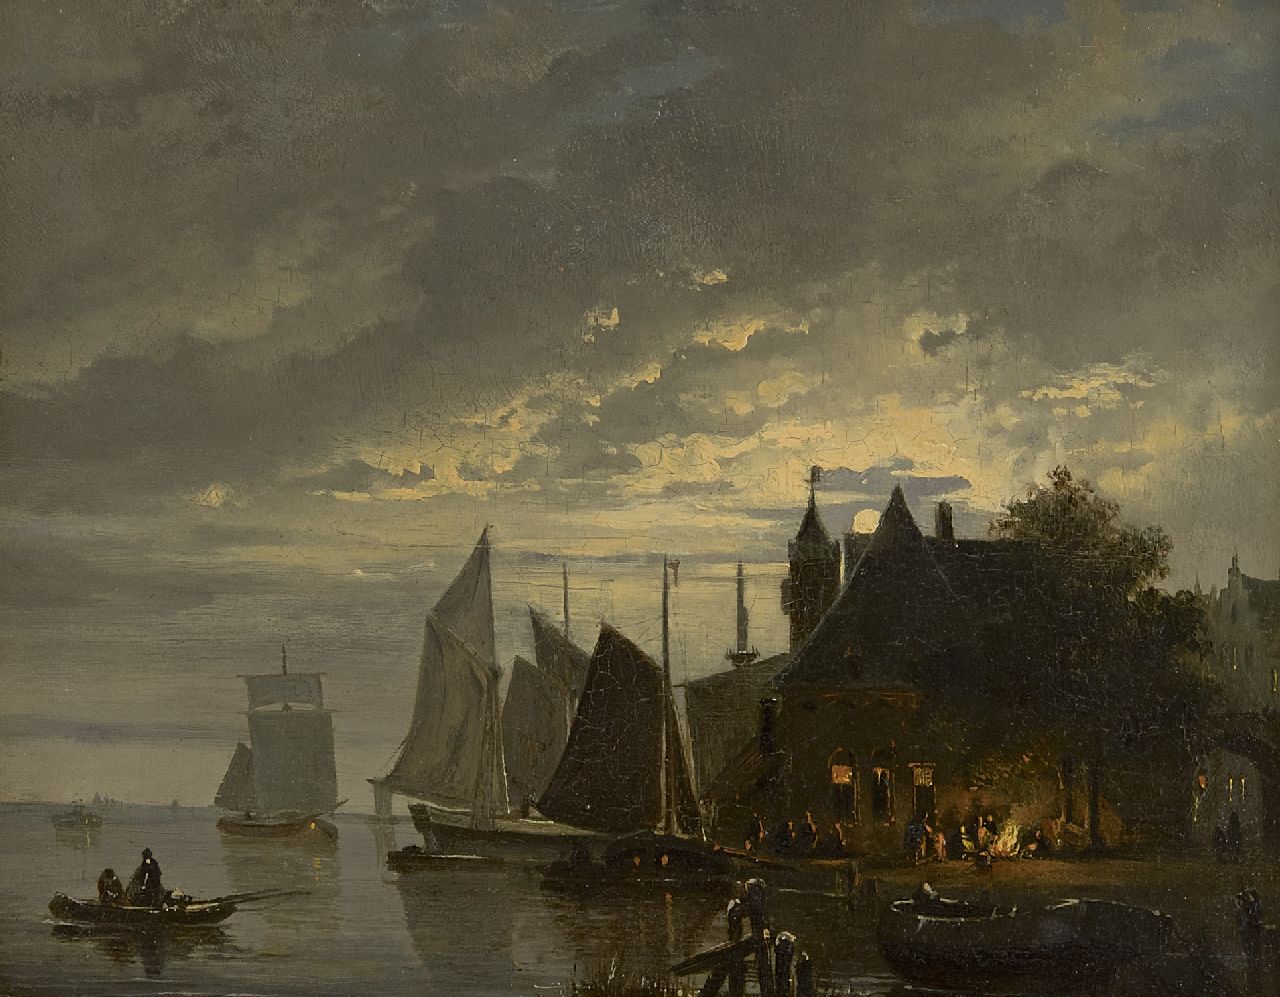 Cate H.G. ten | Hendrik Gerrit ten Cate | Paintings offered for sale | Moored sailing vessels by moonlight, oil on panel 25.1 x 32.0 cm